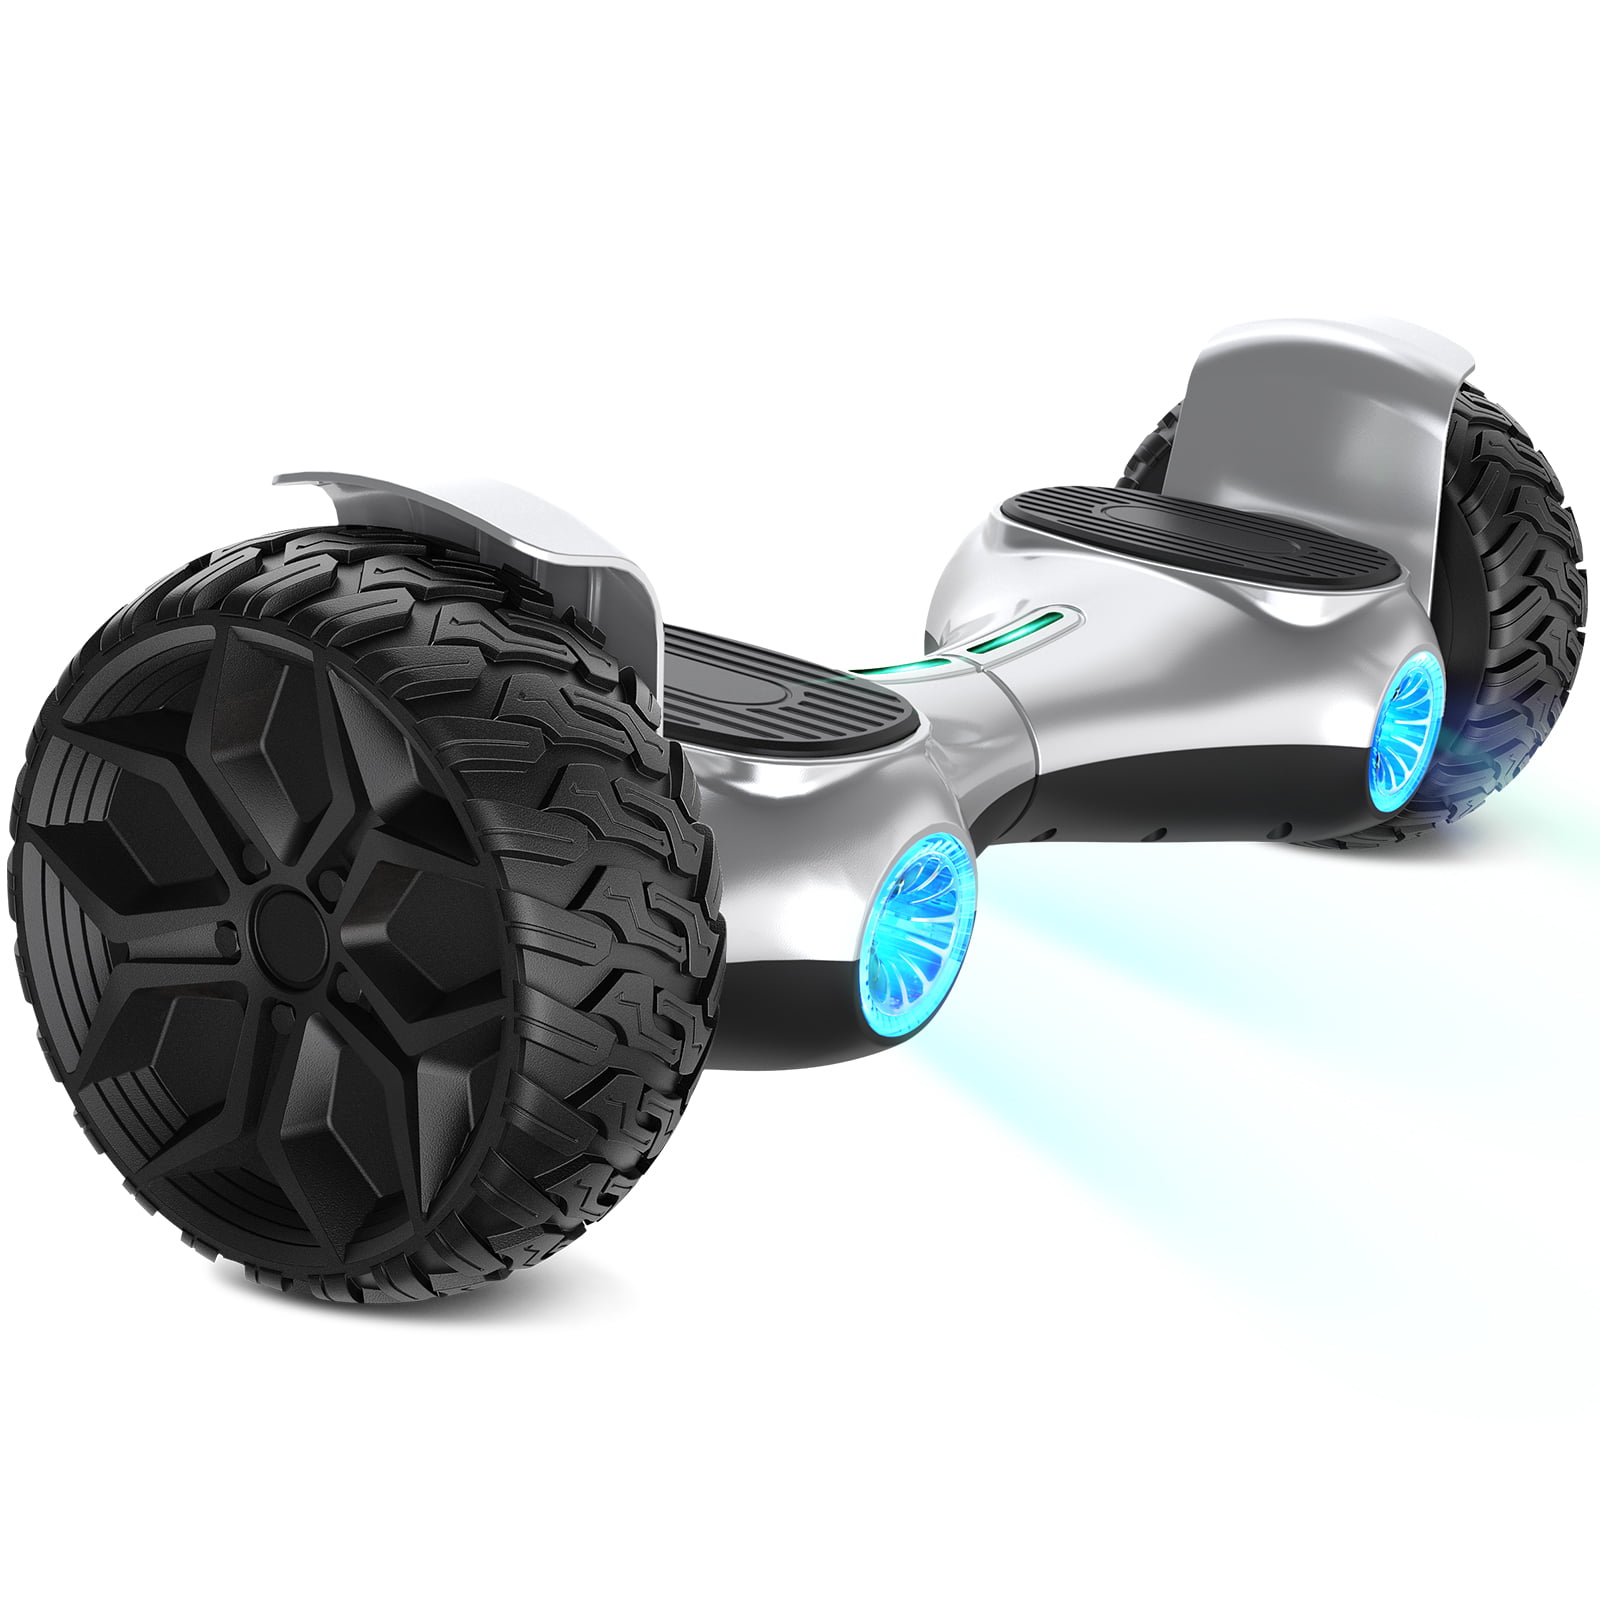 BAG Hoverboard Electric Self Balancing Swegway 10 inch all terrain off road 